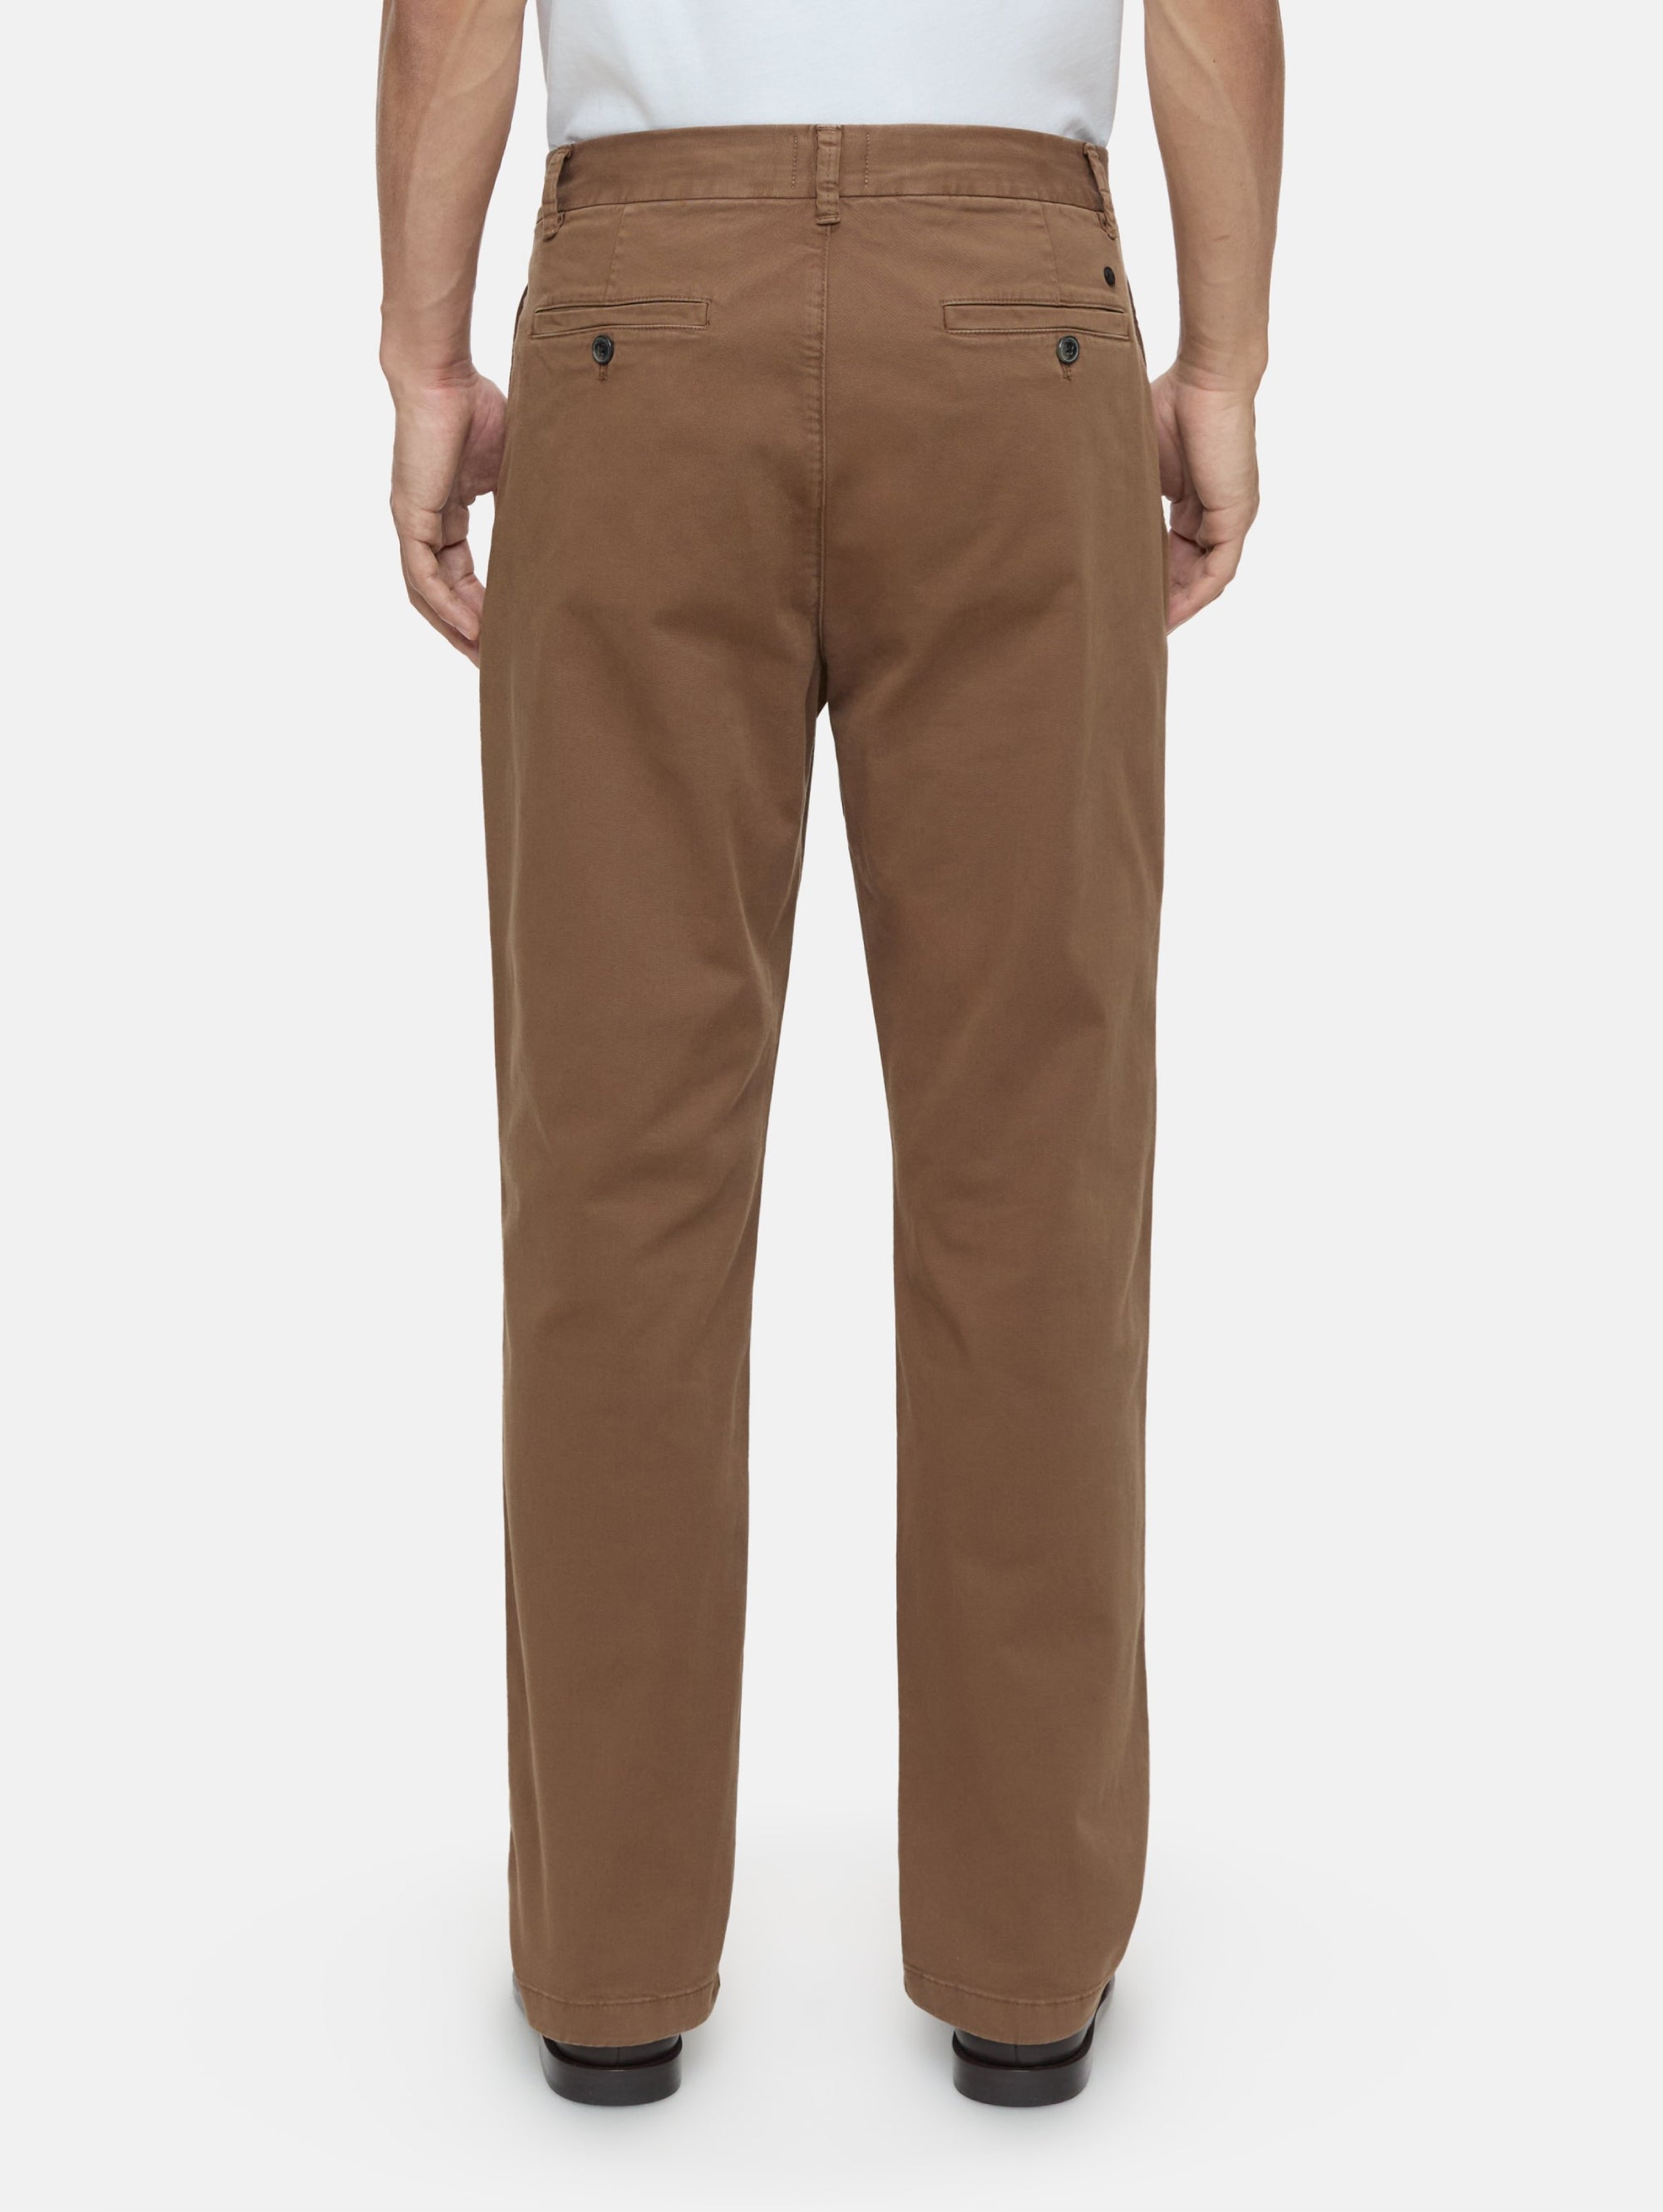 Wooden Cotton Twill Trousers